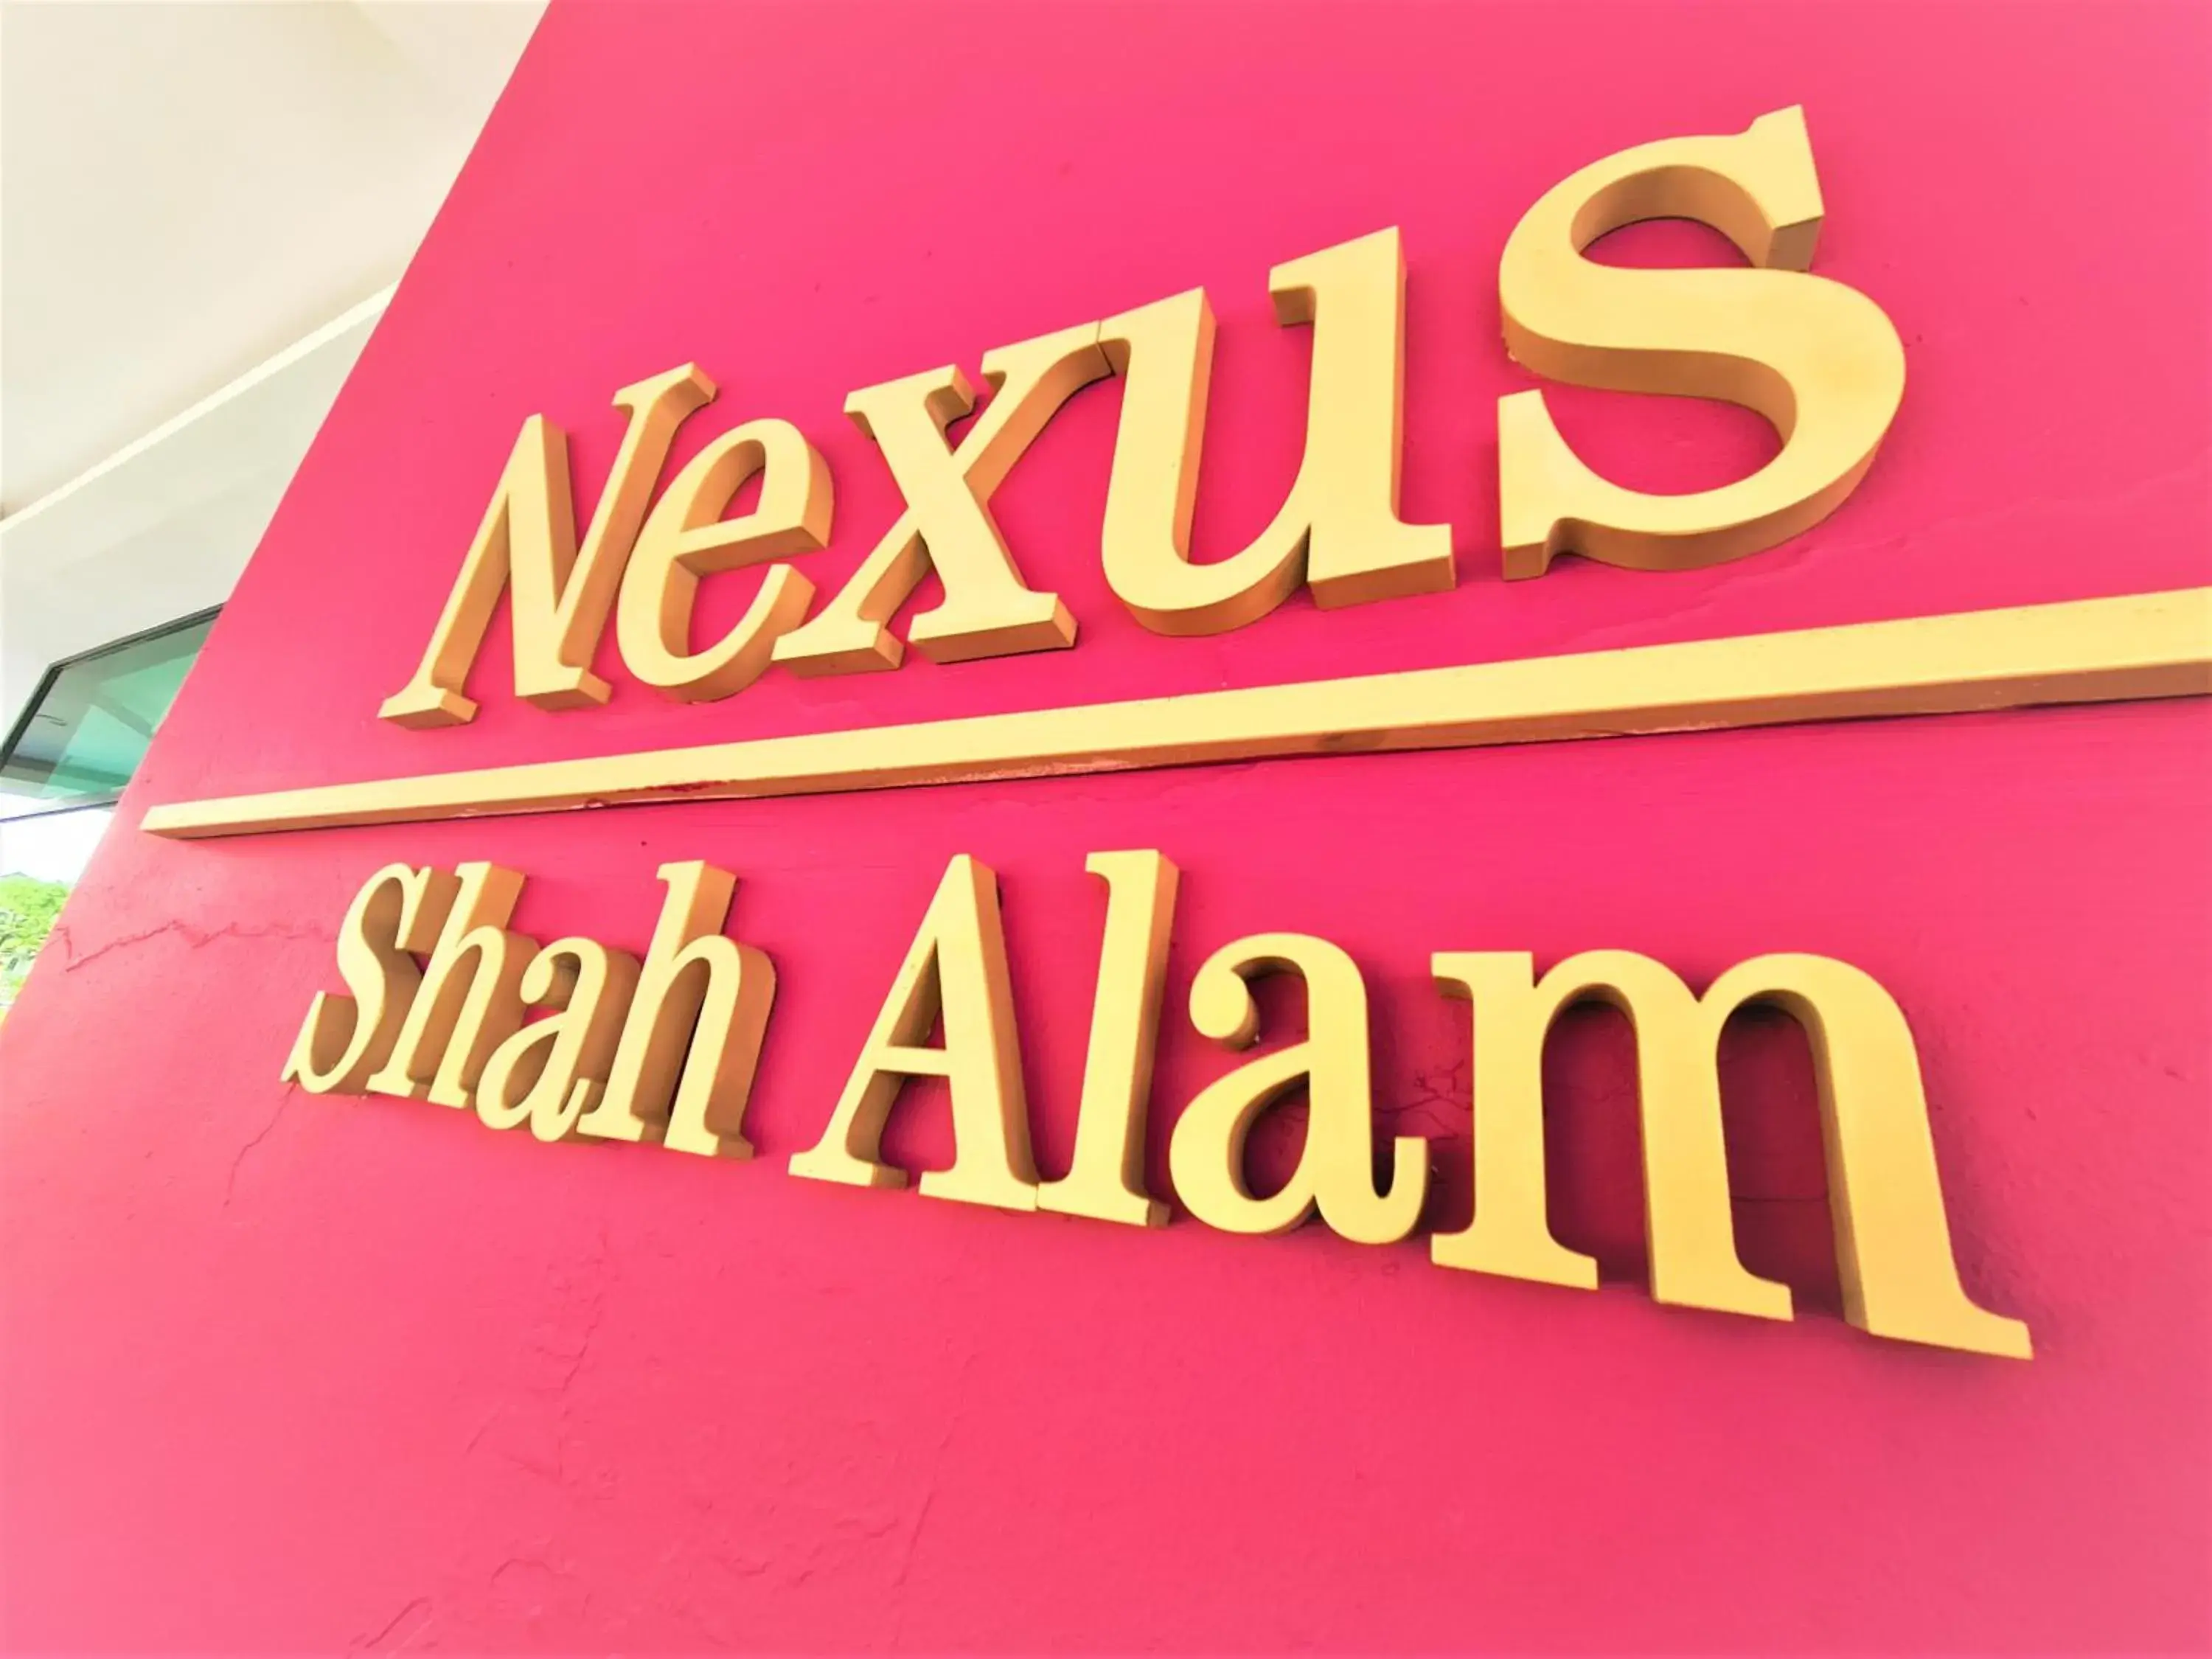 Property logo or sign in Nexus Business Suite Hotel